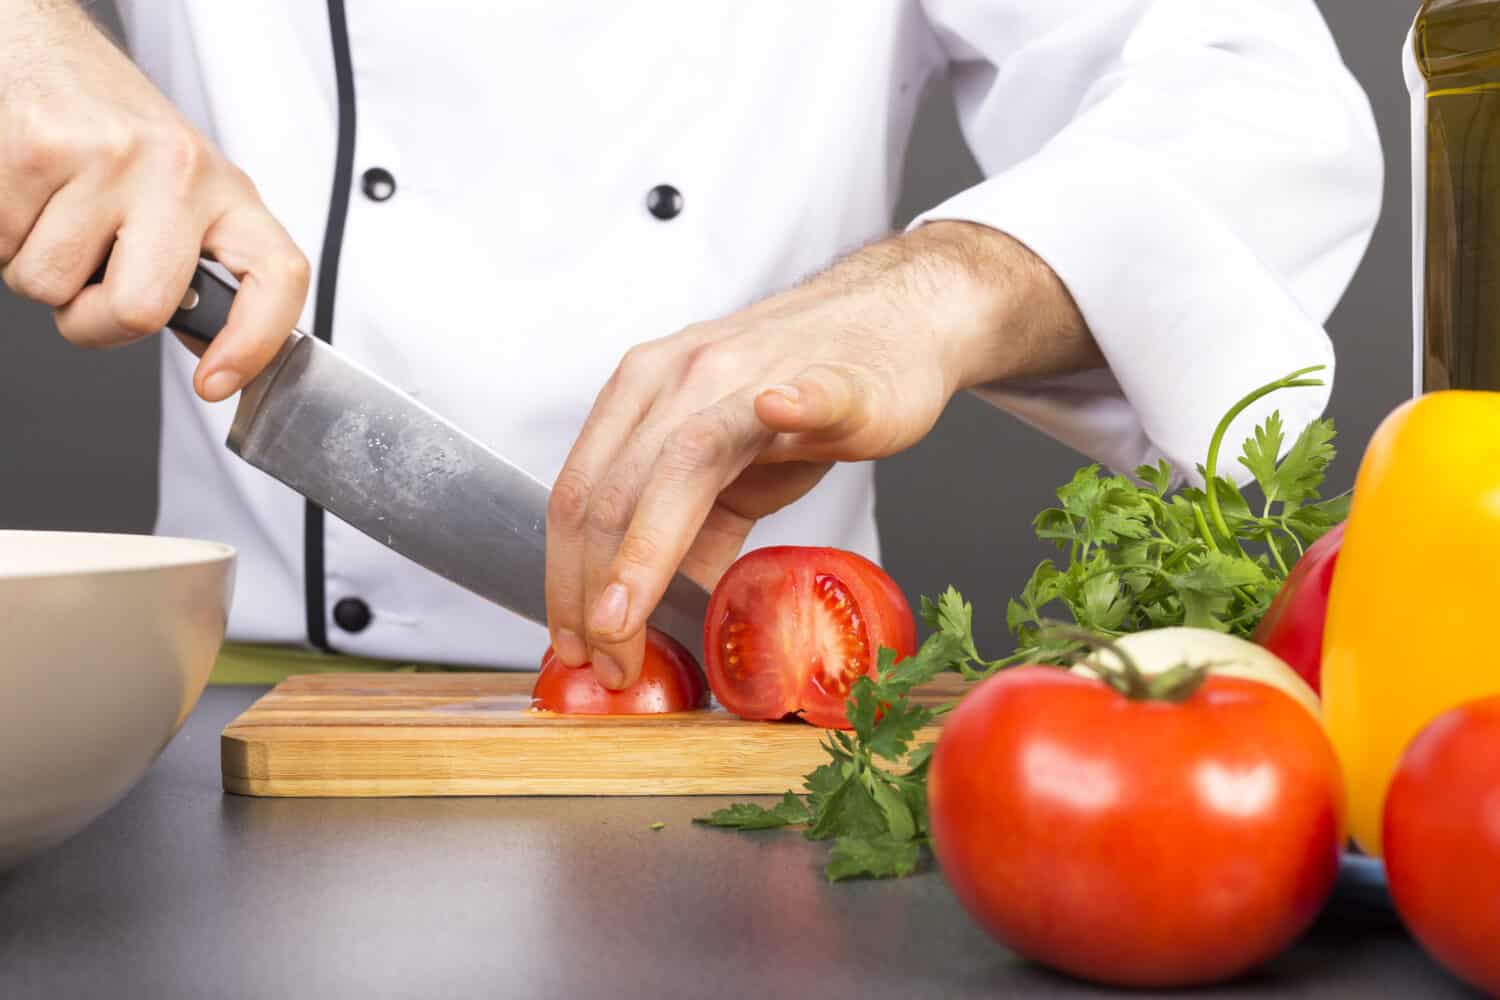 Chef's hands cutting red fresh tomato on a wooden board